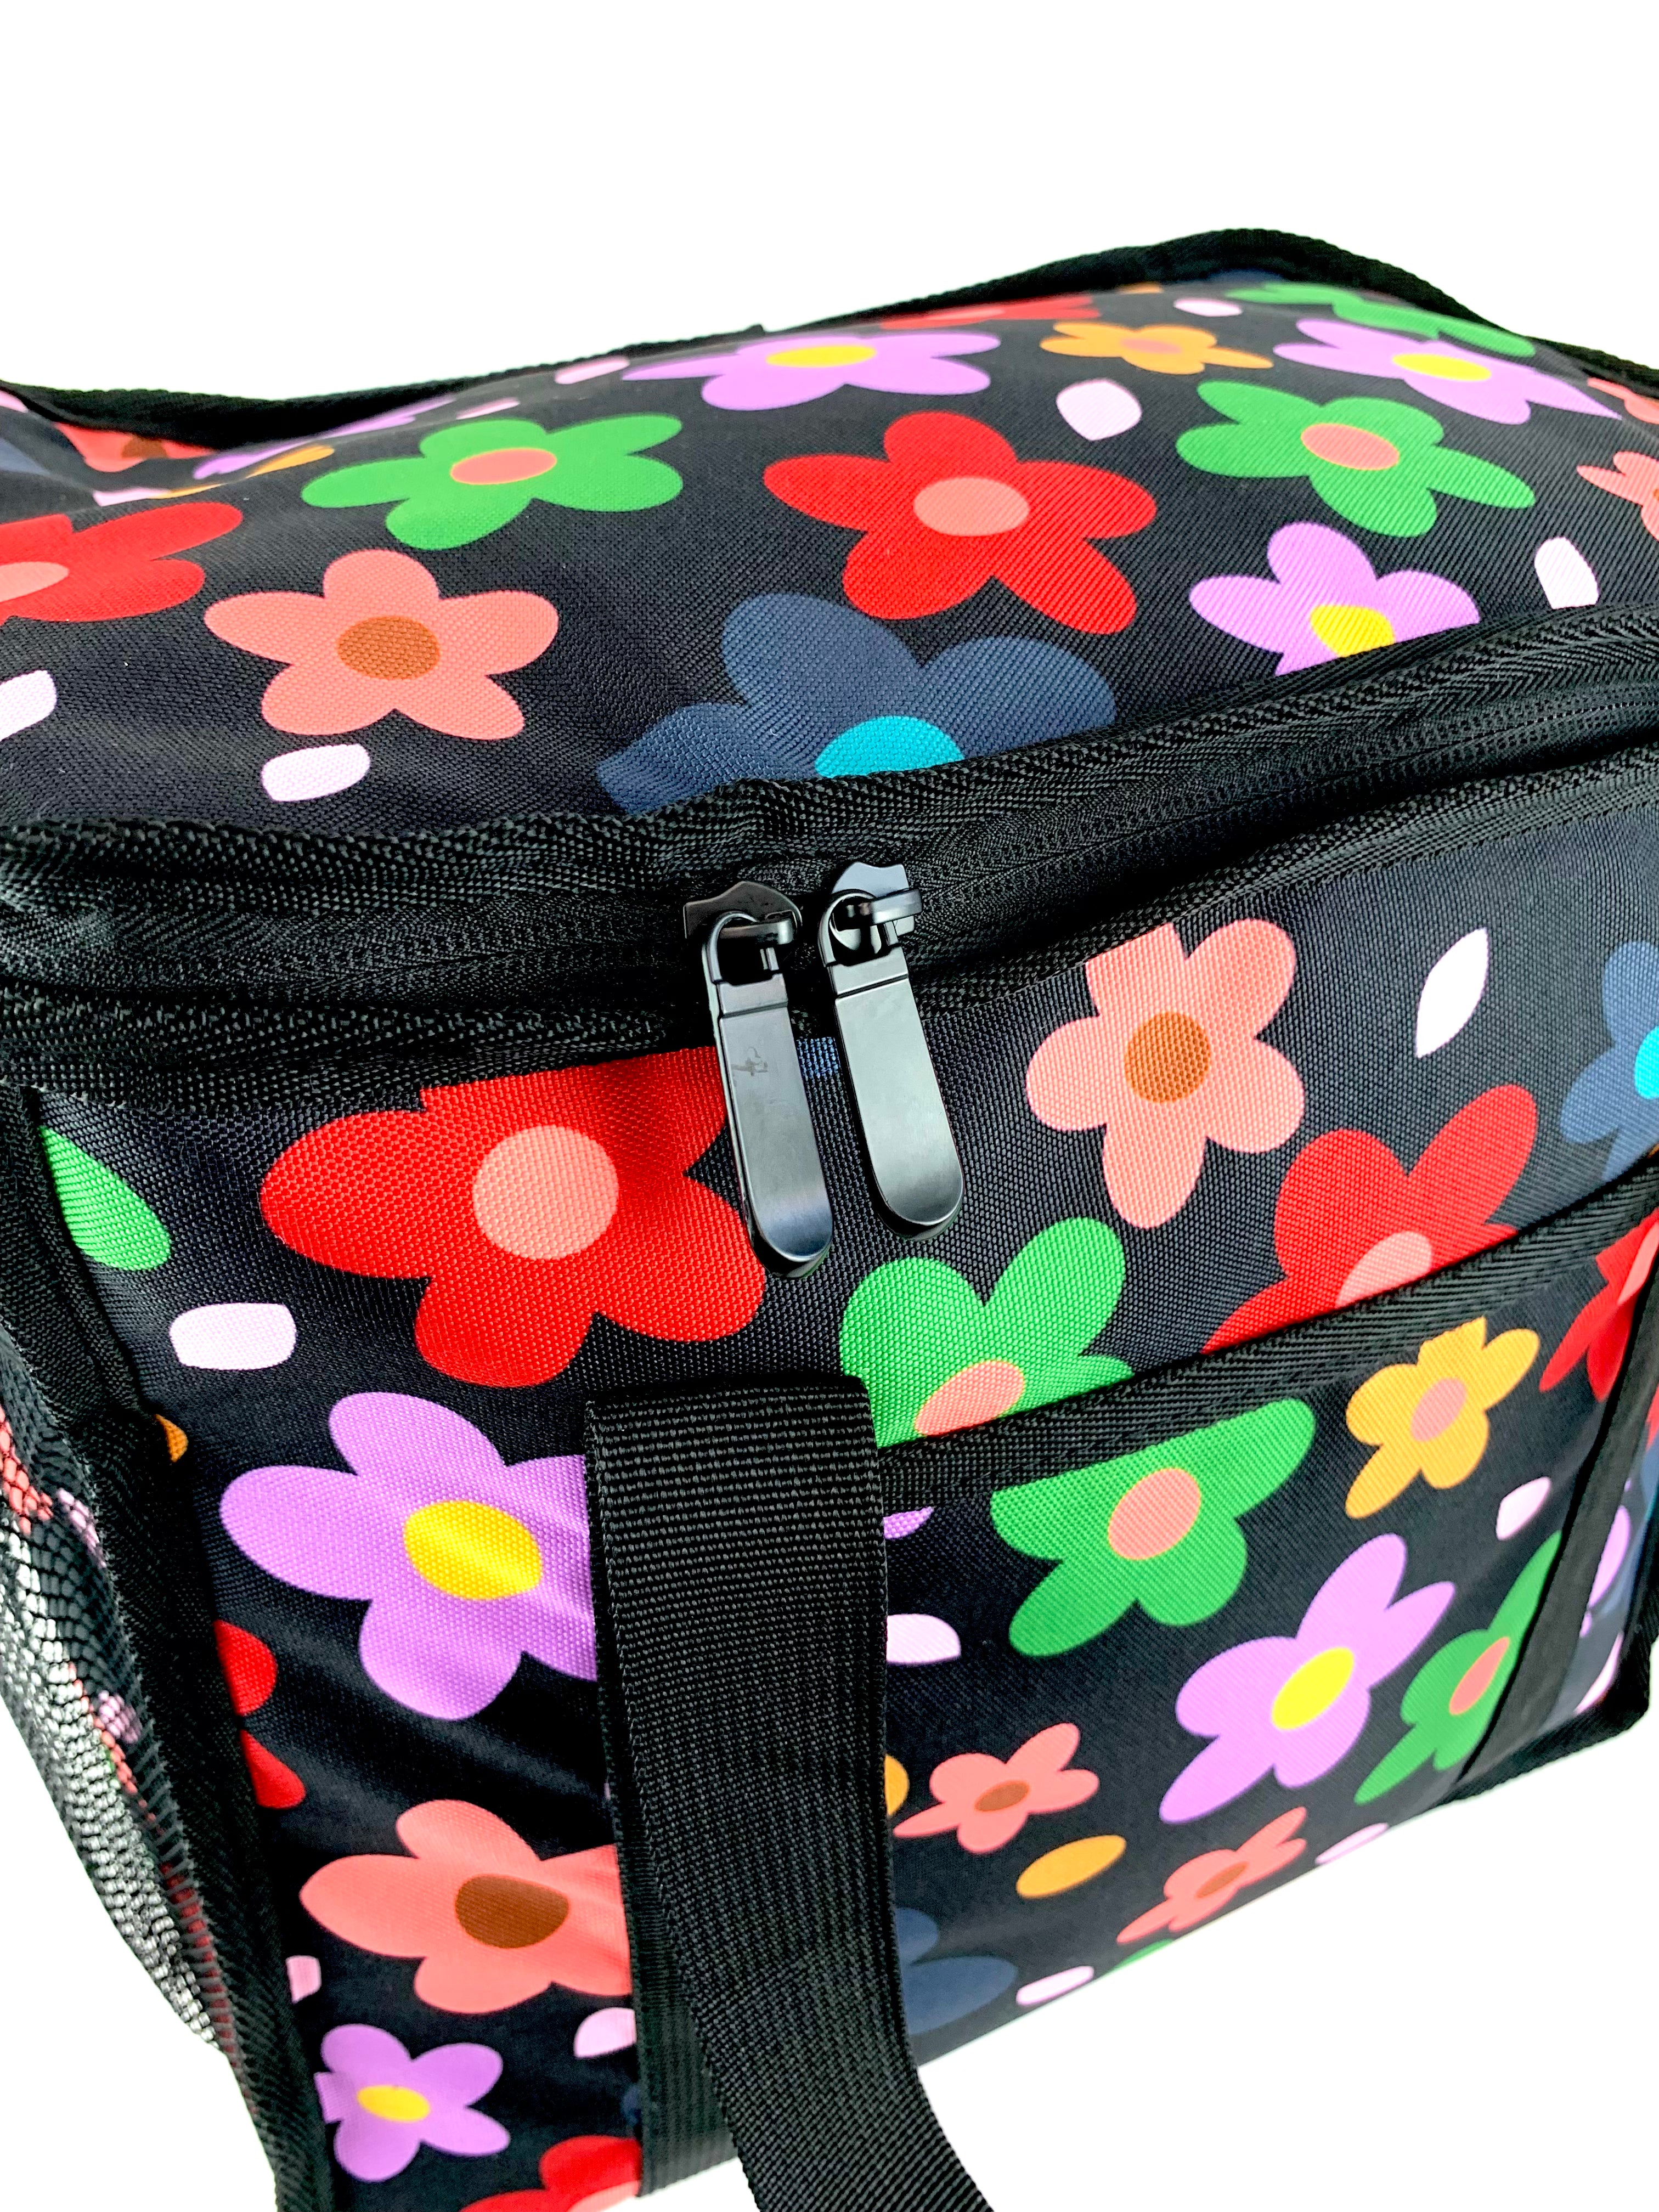 Mid-Size Cooler Bag 'Daisies For Days'